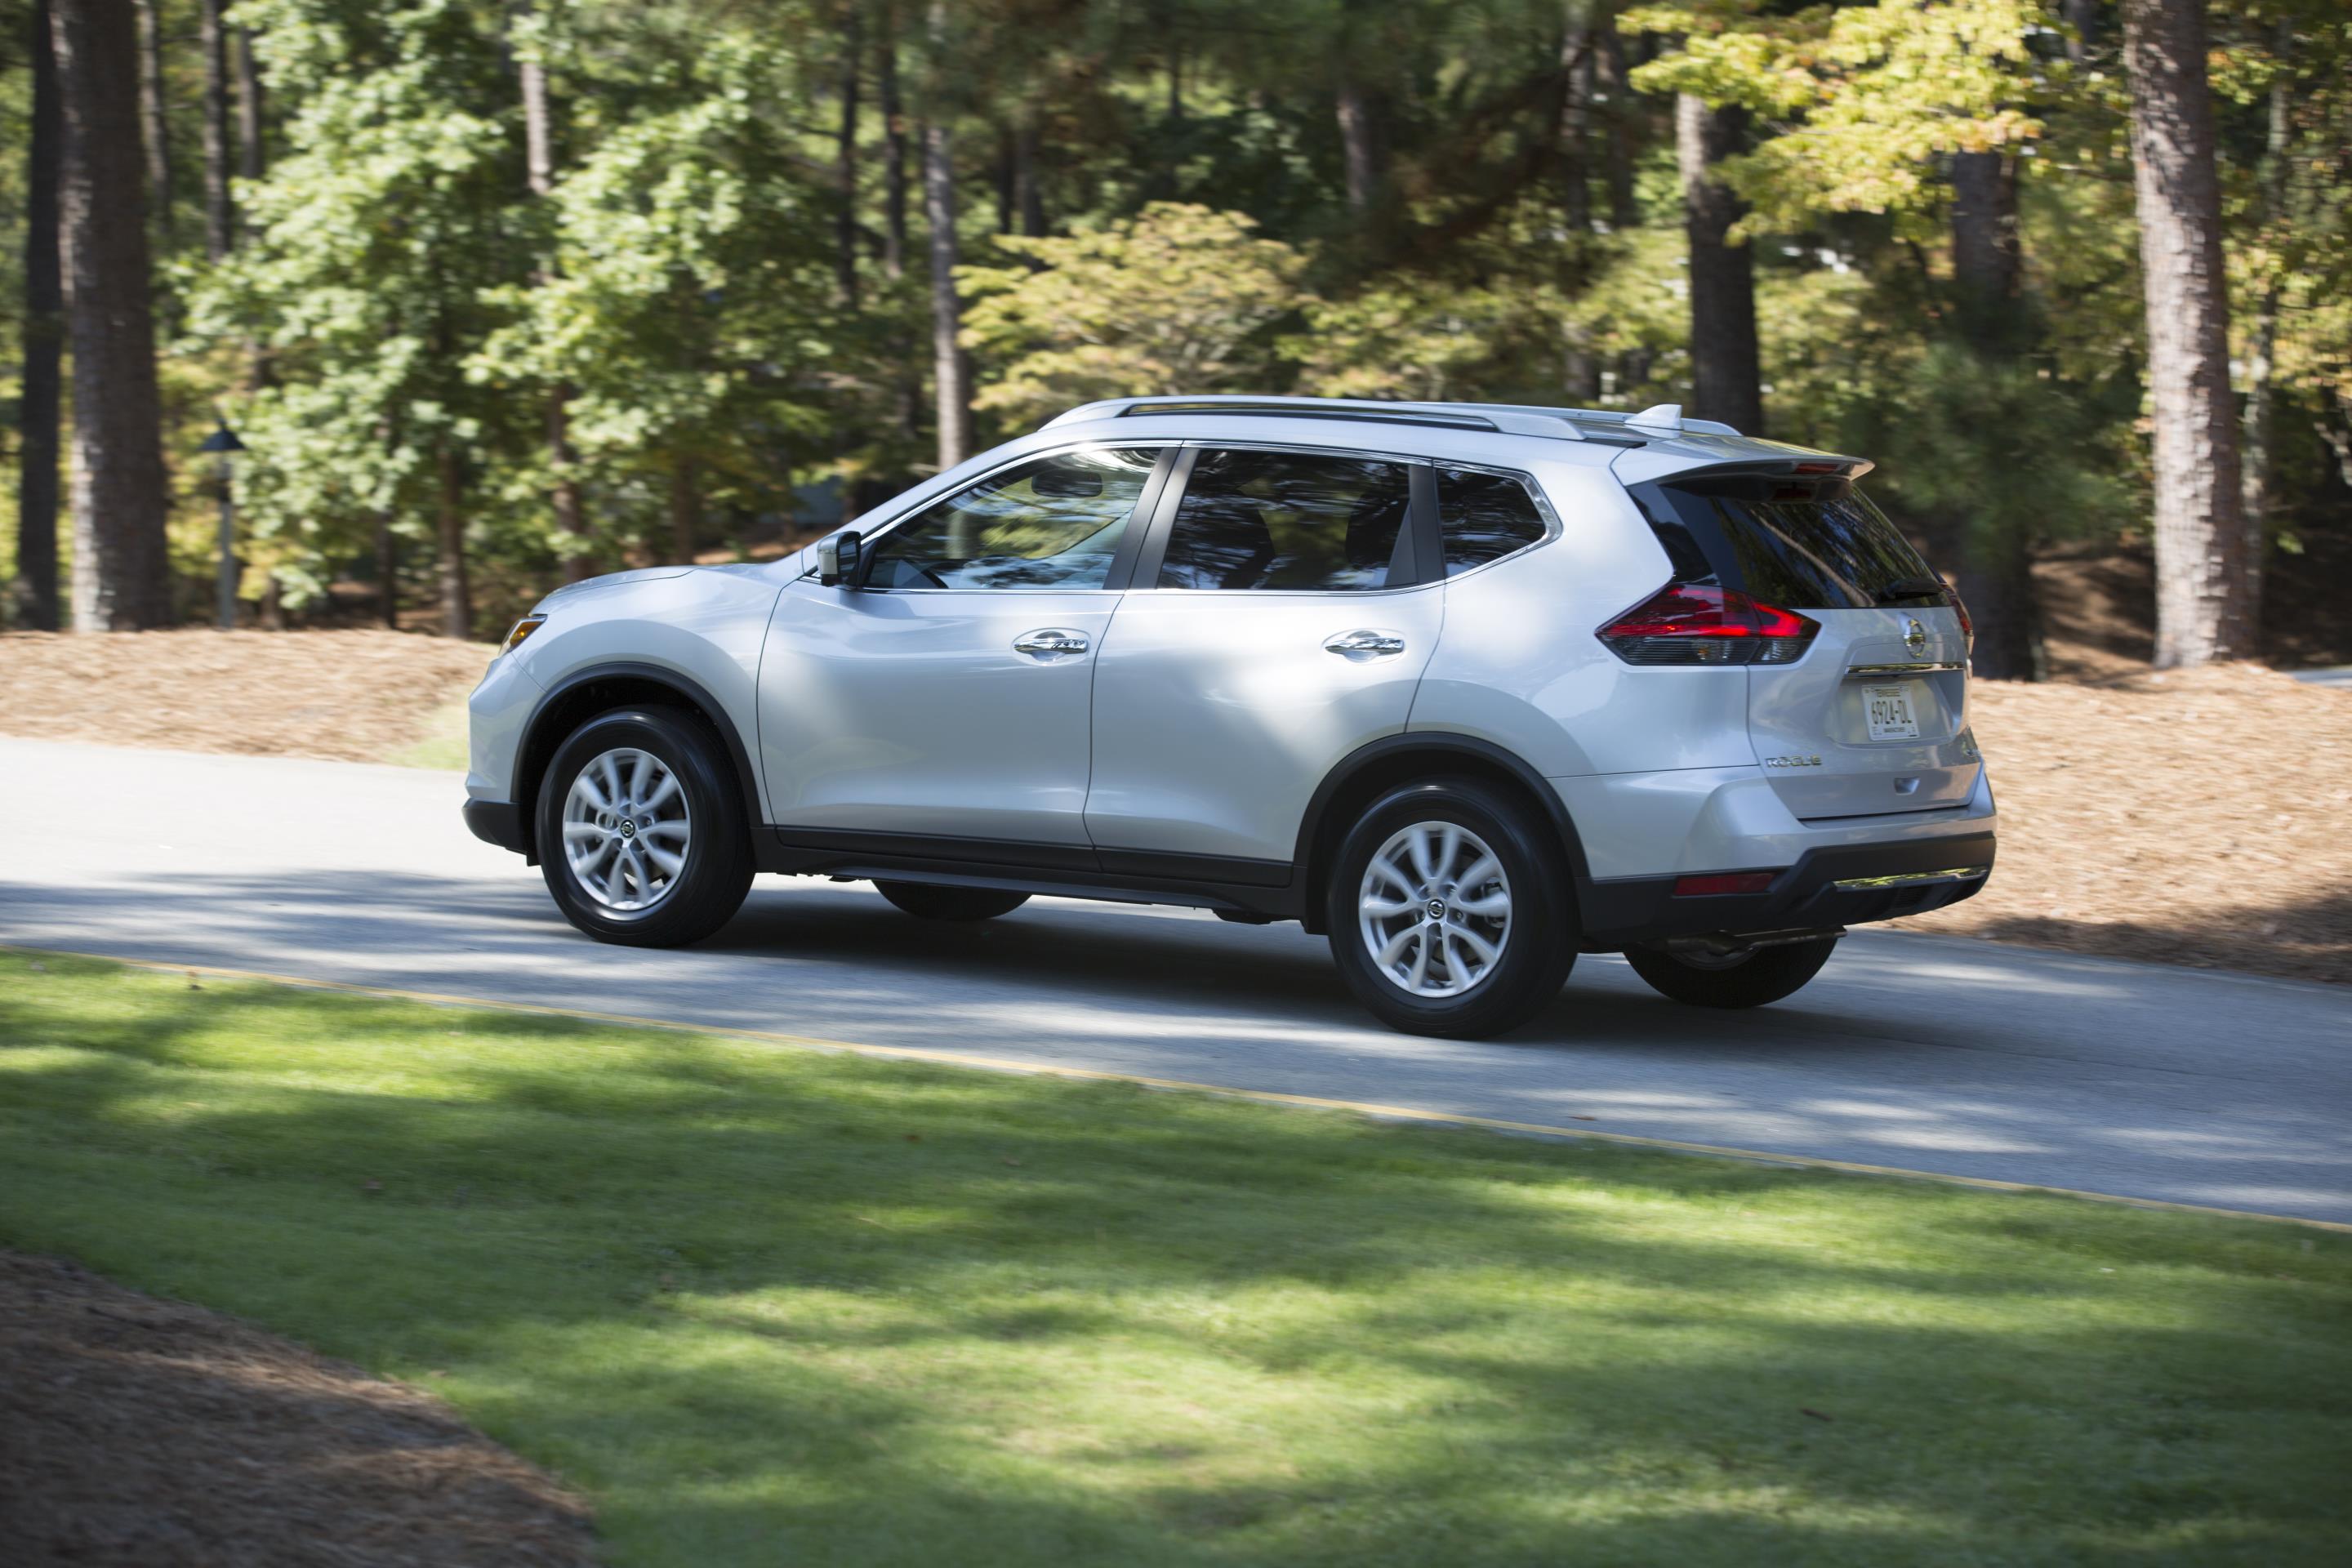 Nissan Rogue, one of Nissan's top selling vehicles in calendar year 2017